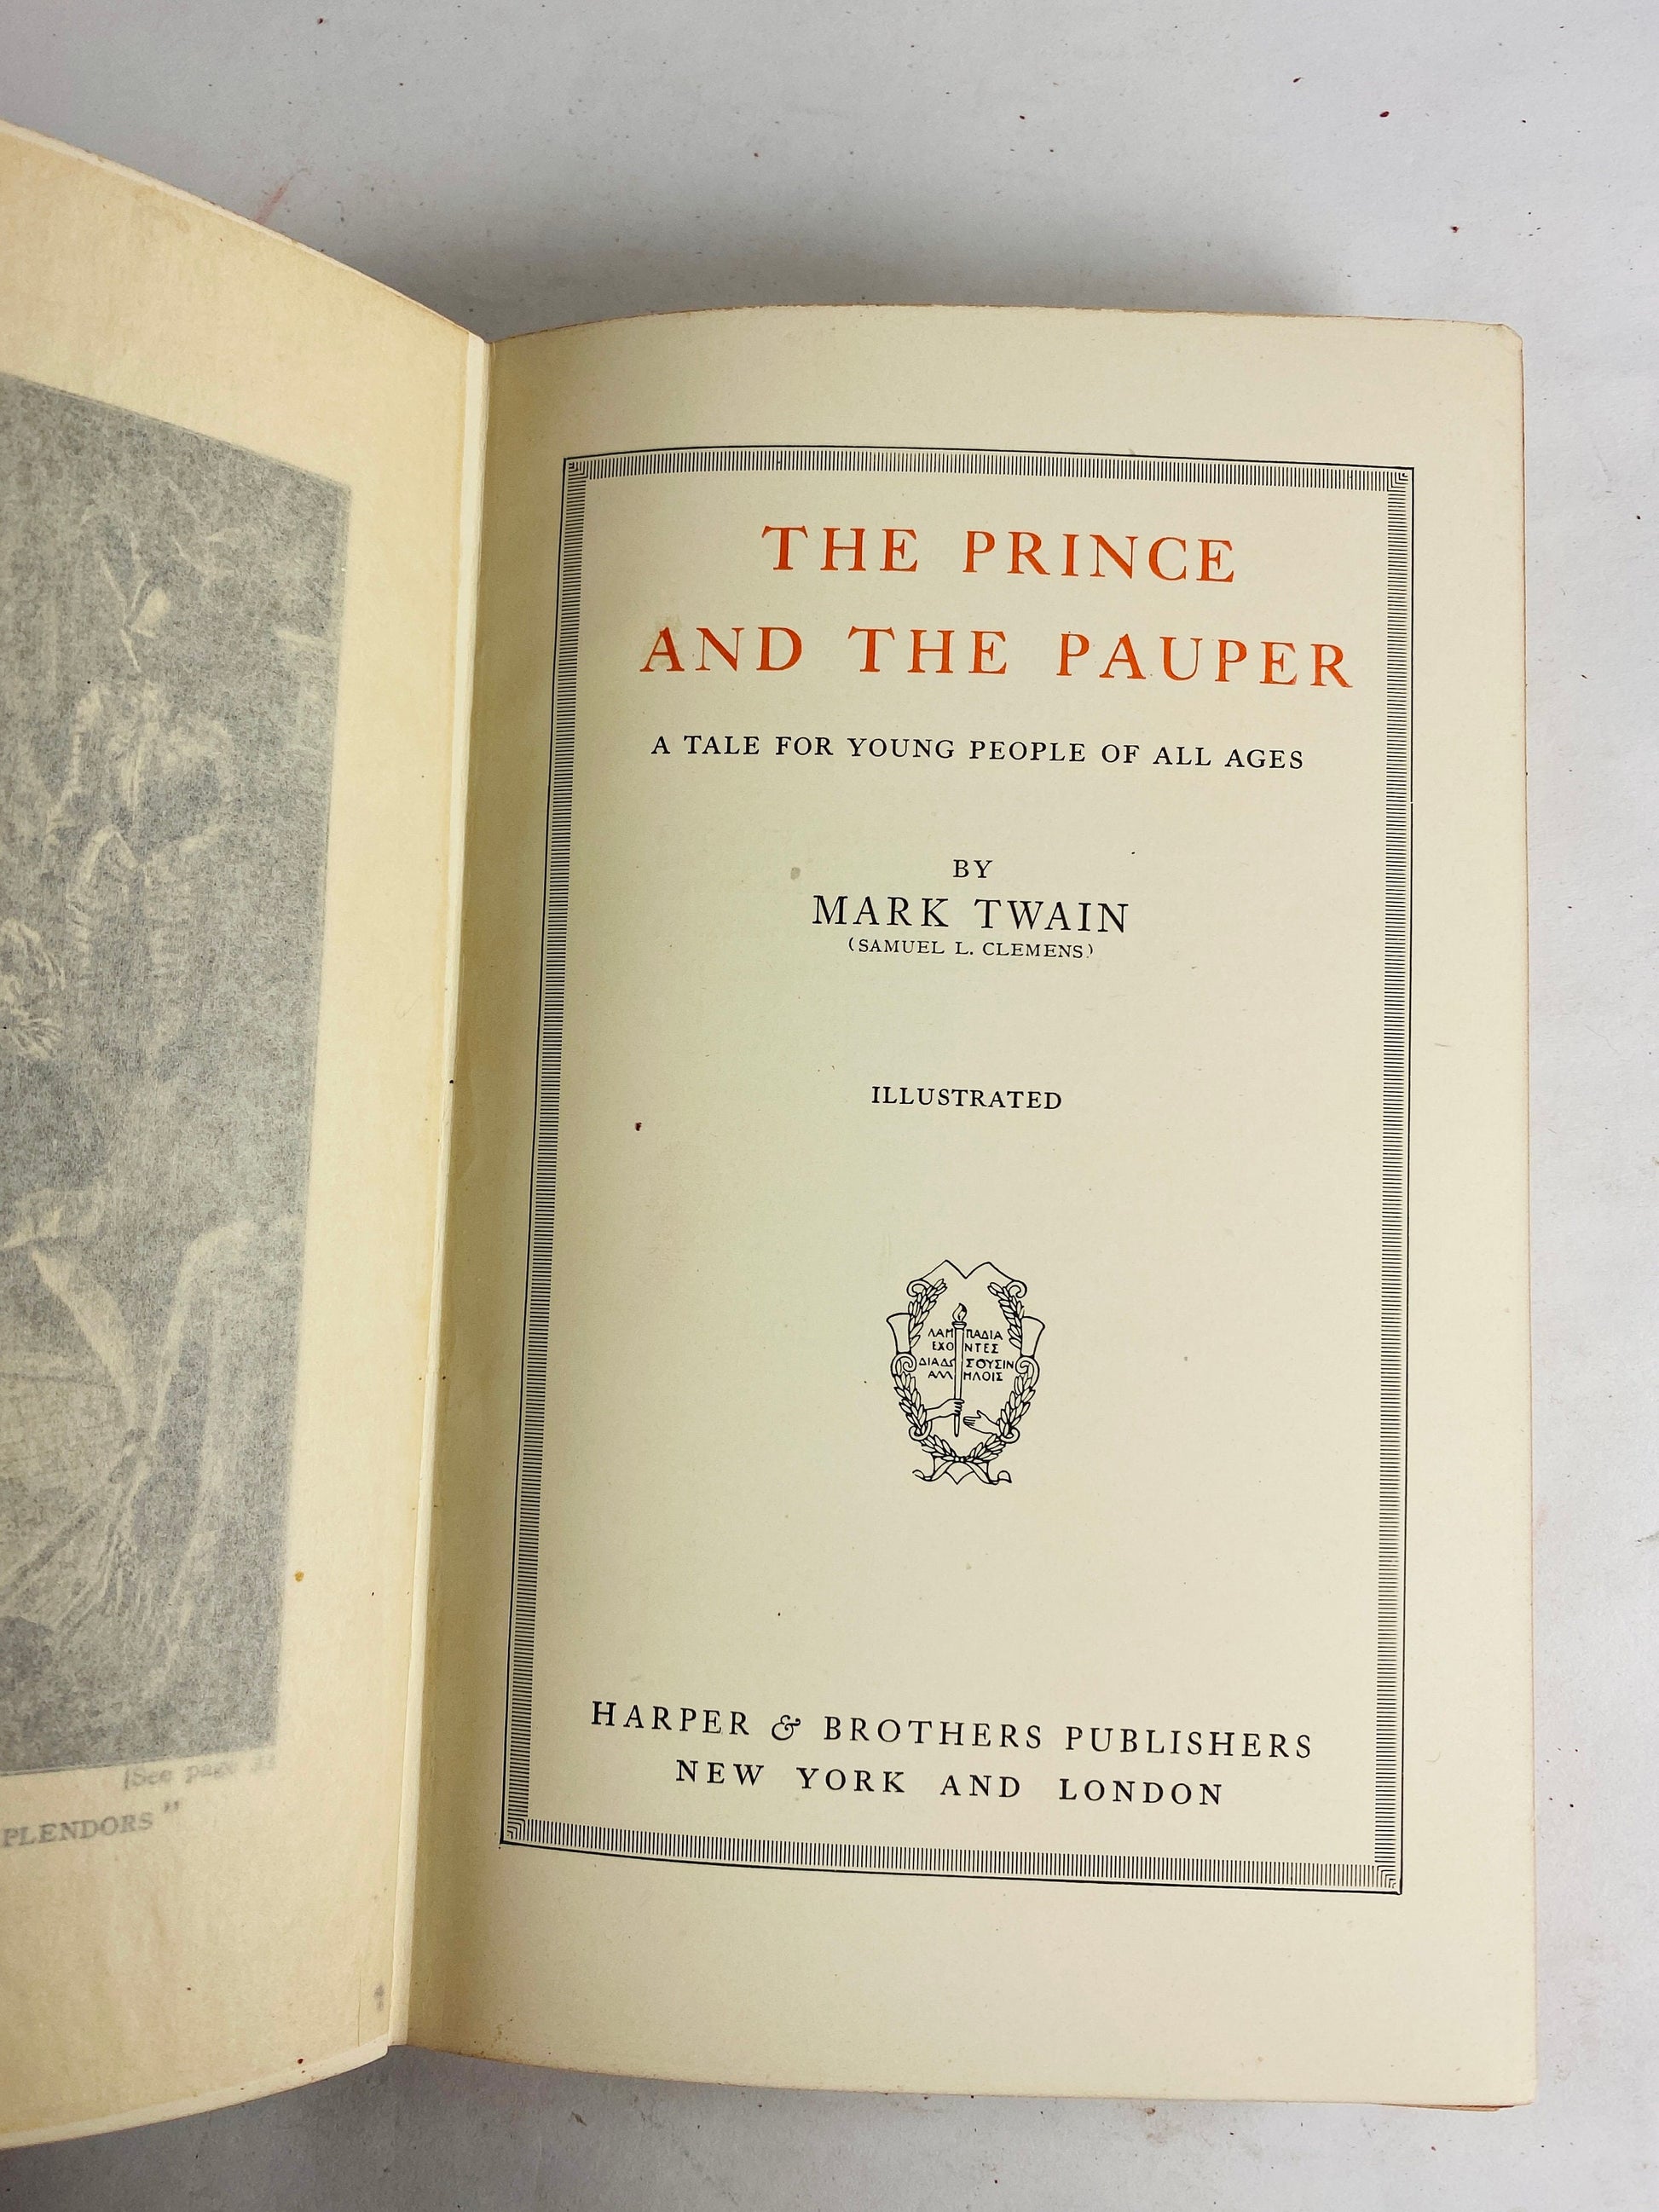 1924 Mark Twain Prince and the Pauper vintage book Samuel Clemens Harriet Shelley Sketches small red leather home bookshelf decor antique